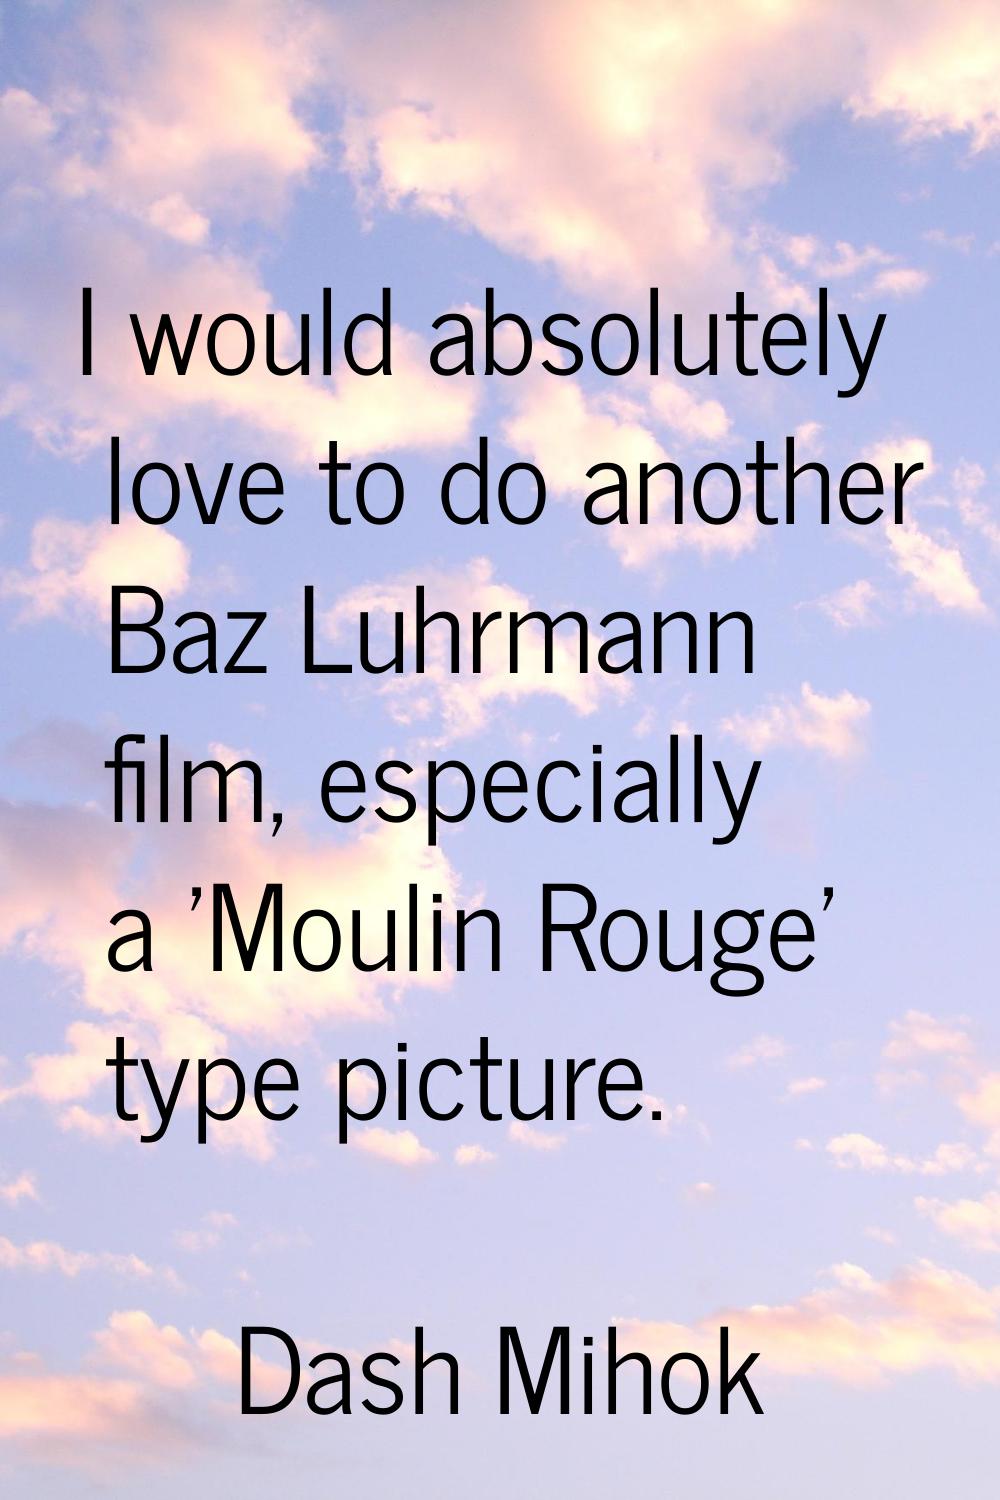 I would absolutely love to do another Baz Luhrmann film, especially a 'Moulin Rouge' type picture.